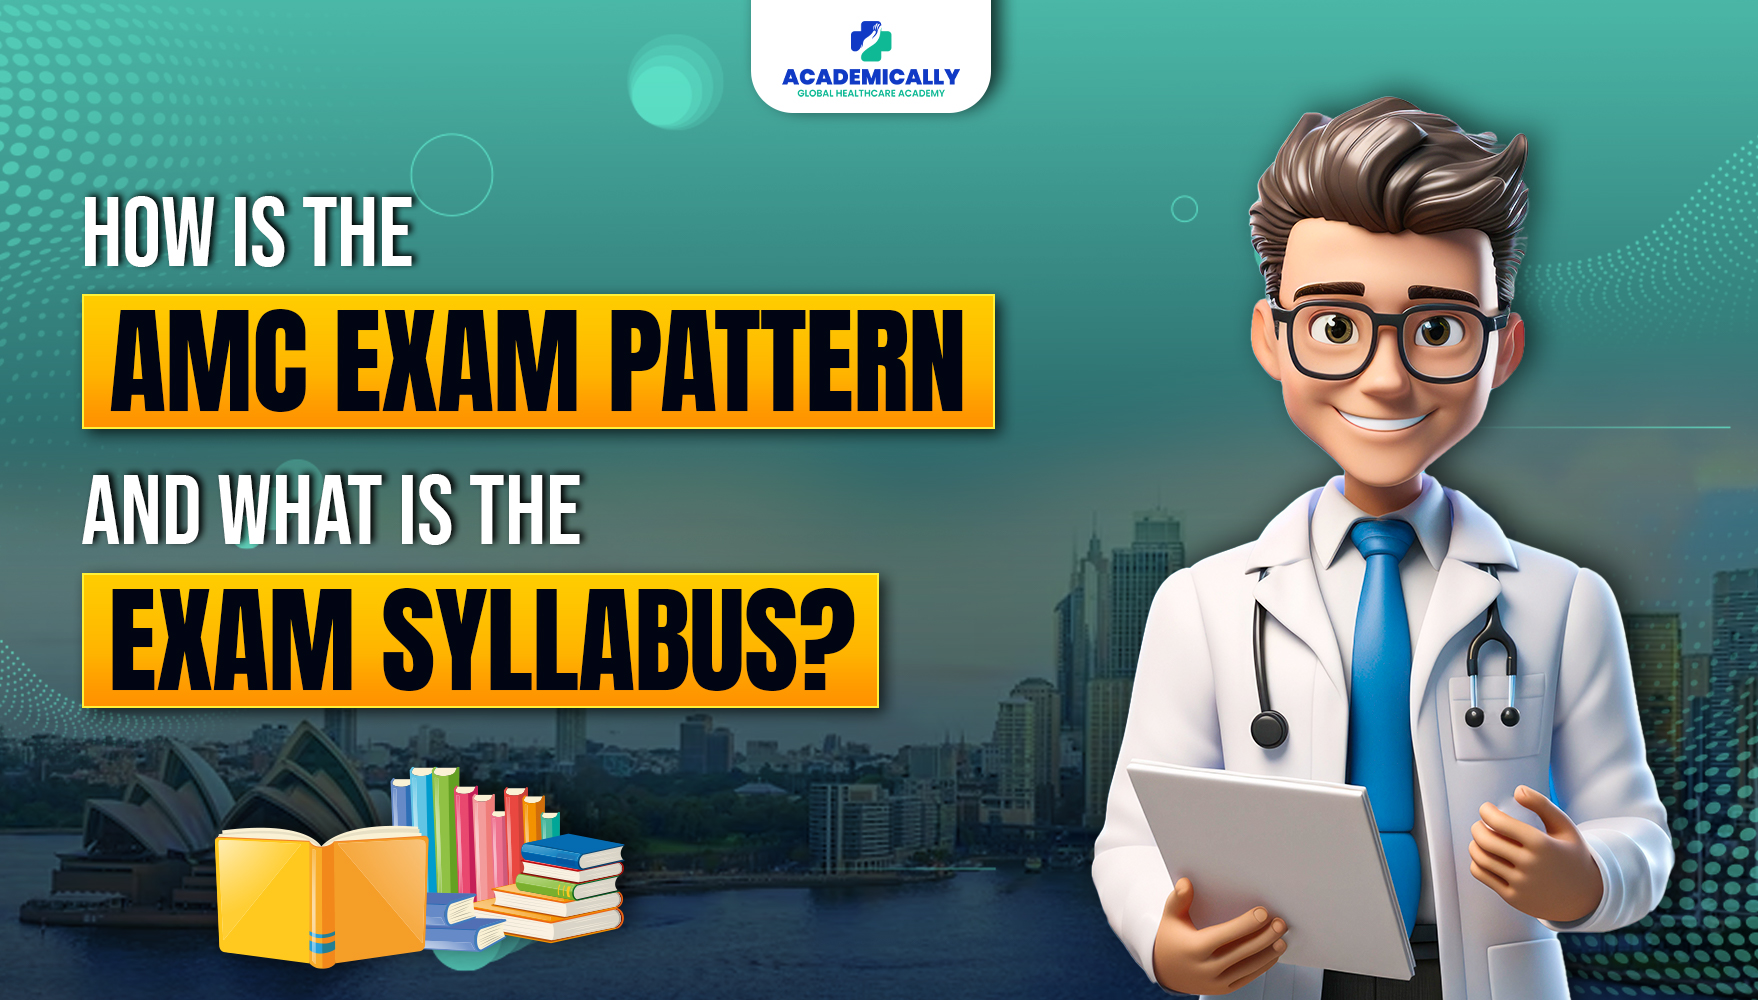 A blog on the AMC exam pattern and syllabus